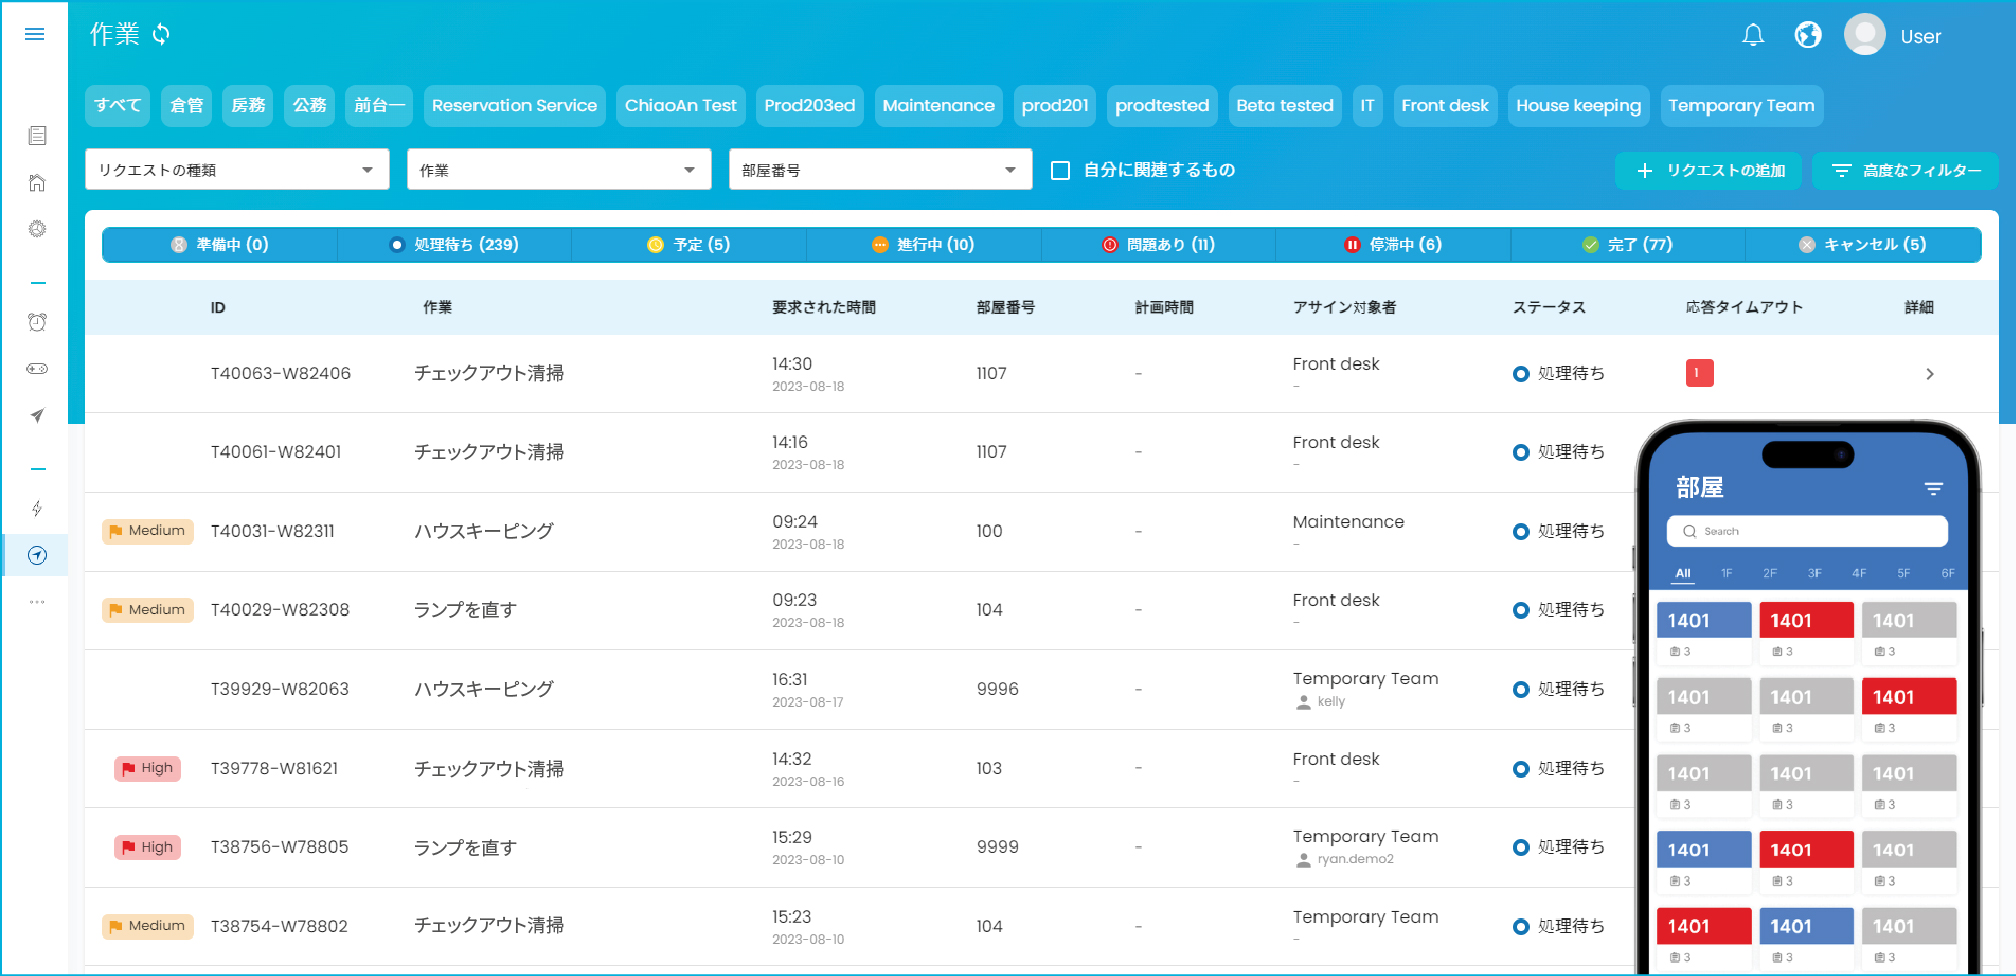 Aiello Task Management System Home Page in Japanese